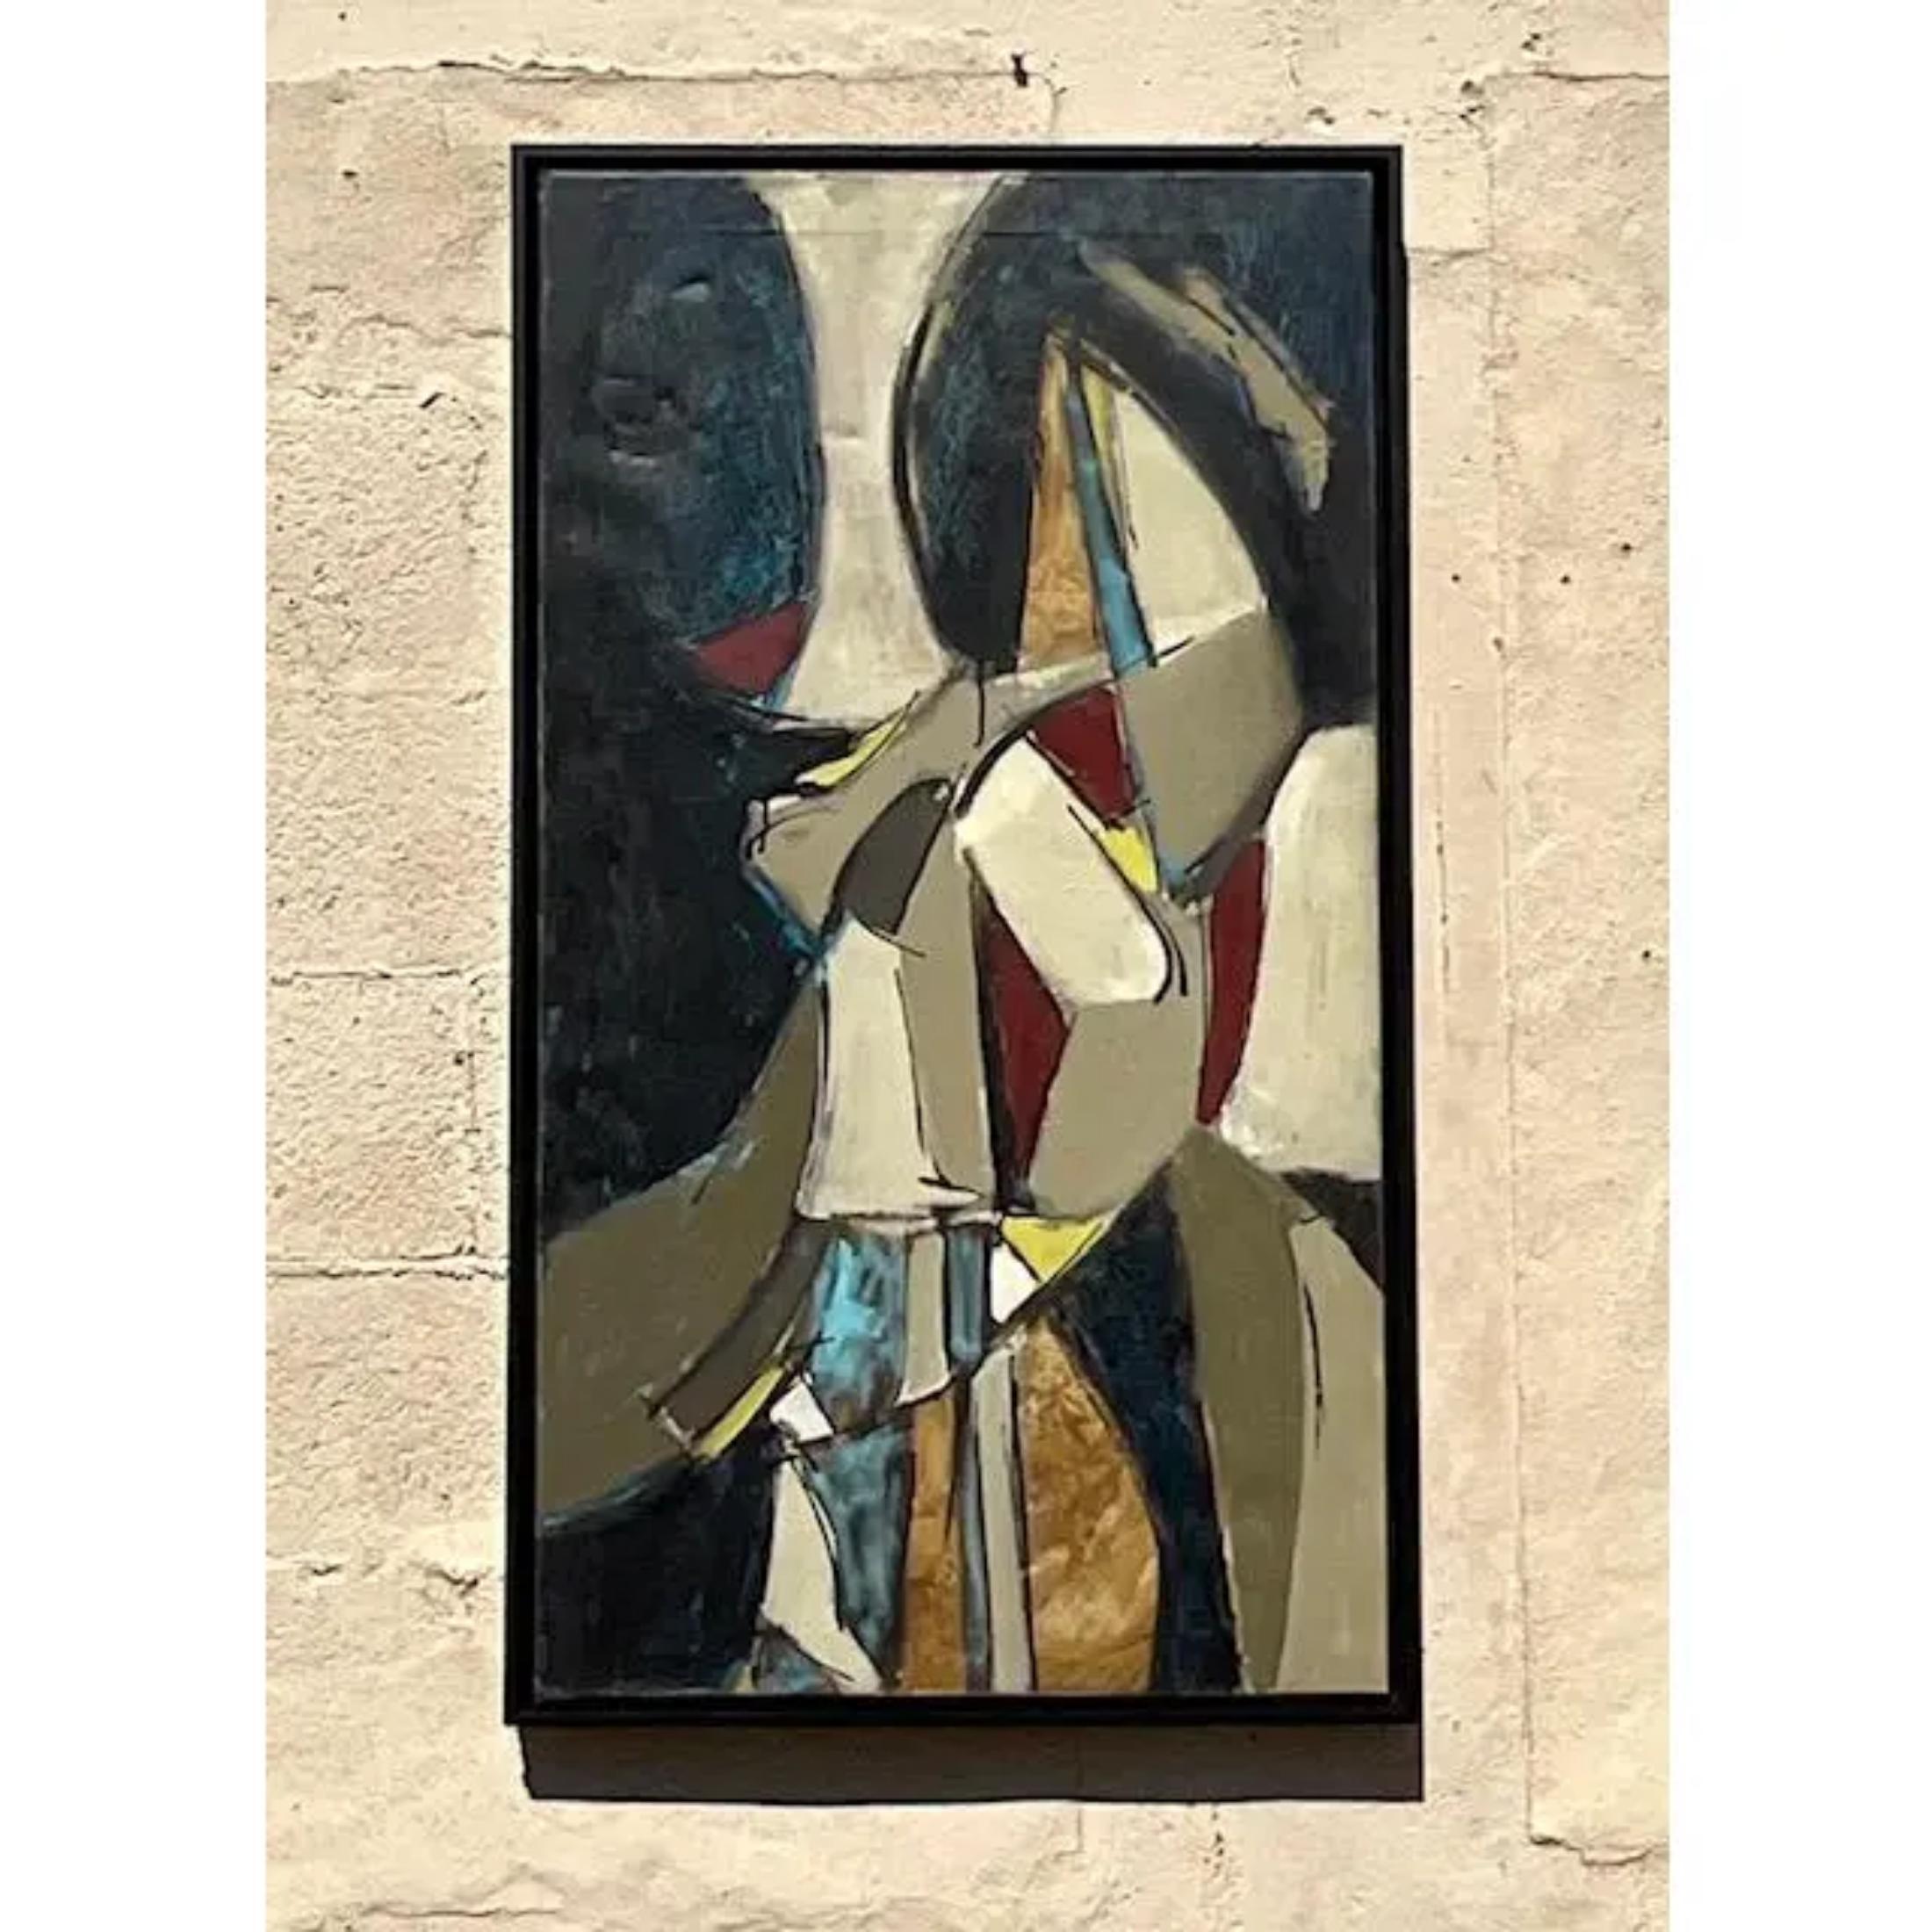 A fabulous vintage original oil painting on canvas. A chic Abstract composition with a geometric design. Coordinating painting also available on my Chairish page. See pics for second painting. Signed by the artist. Acquired from a Miami estate.